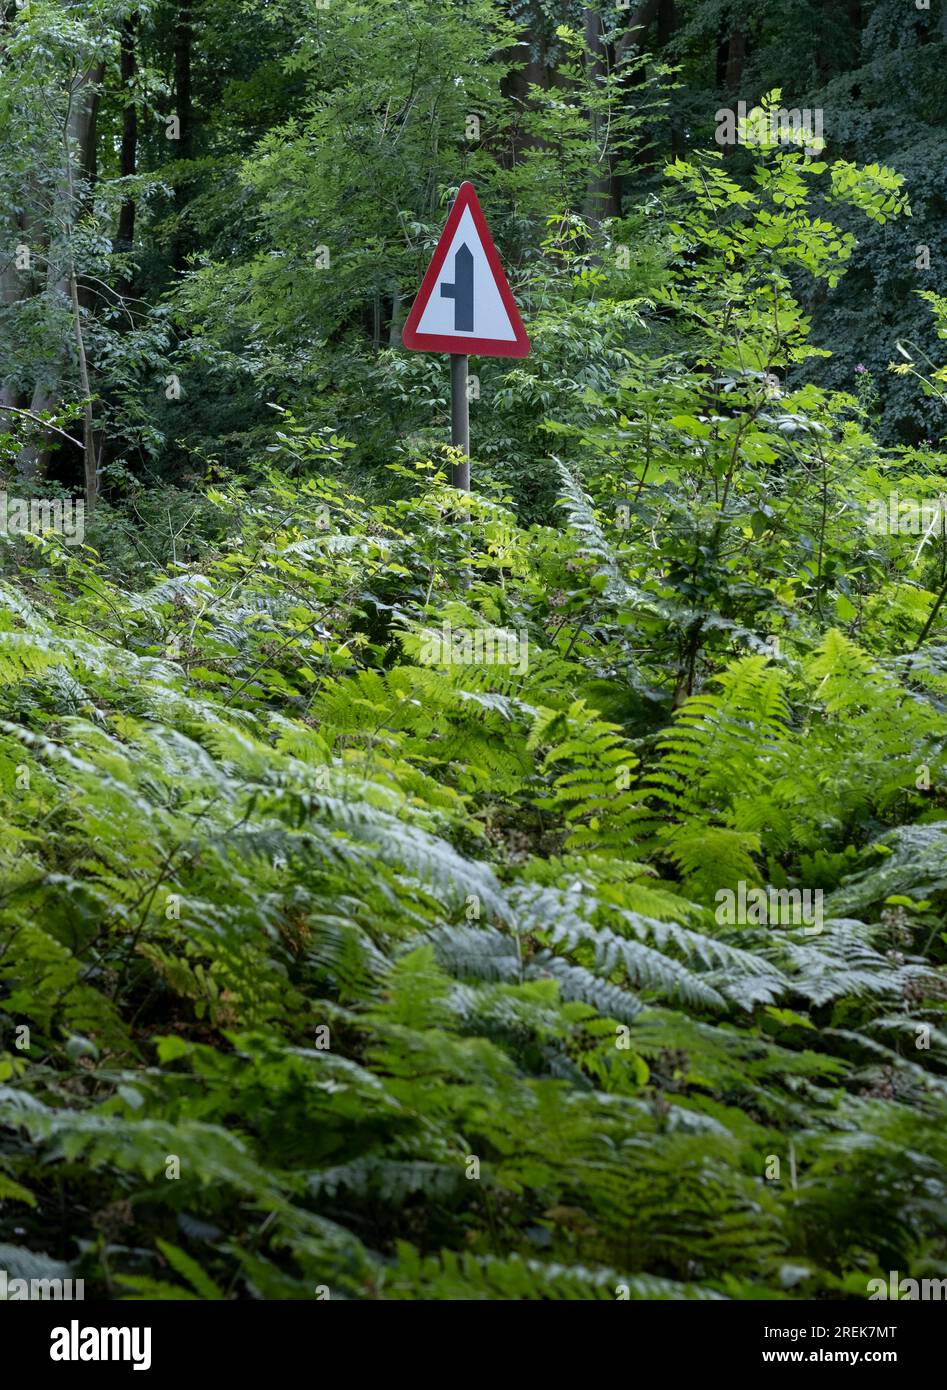 A road juntion warning sign in woodland, Worcestershire, England. Stock Photo